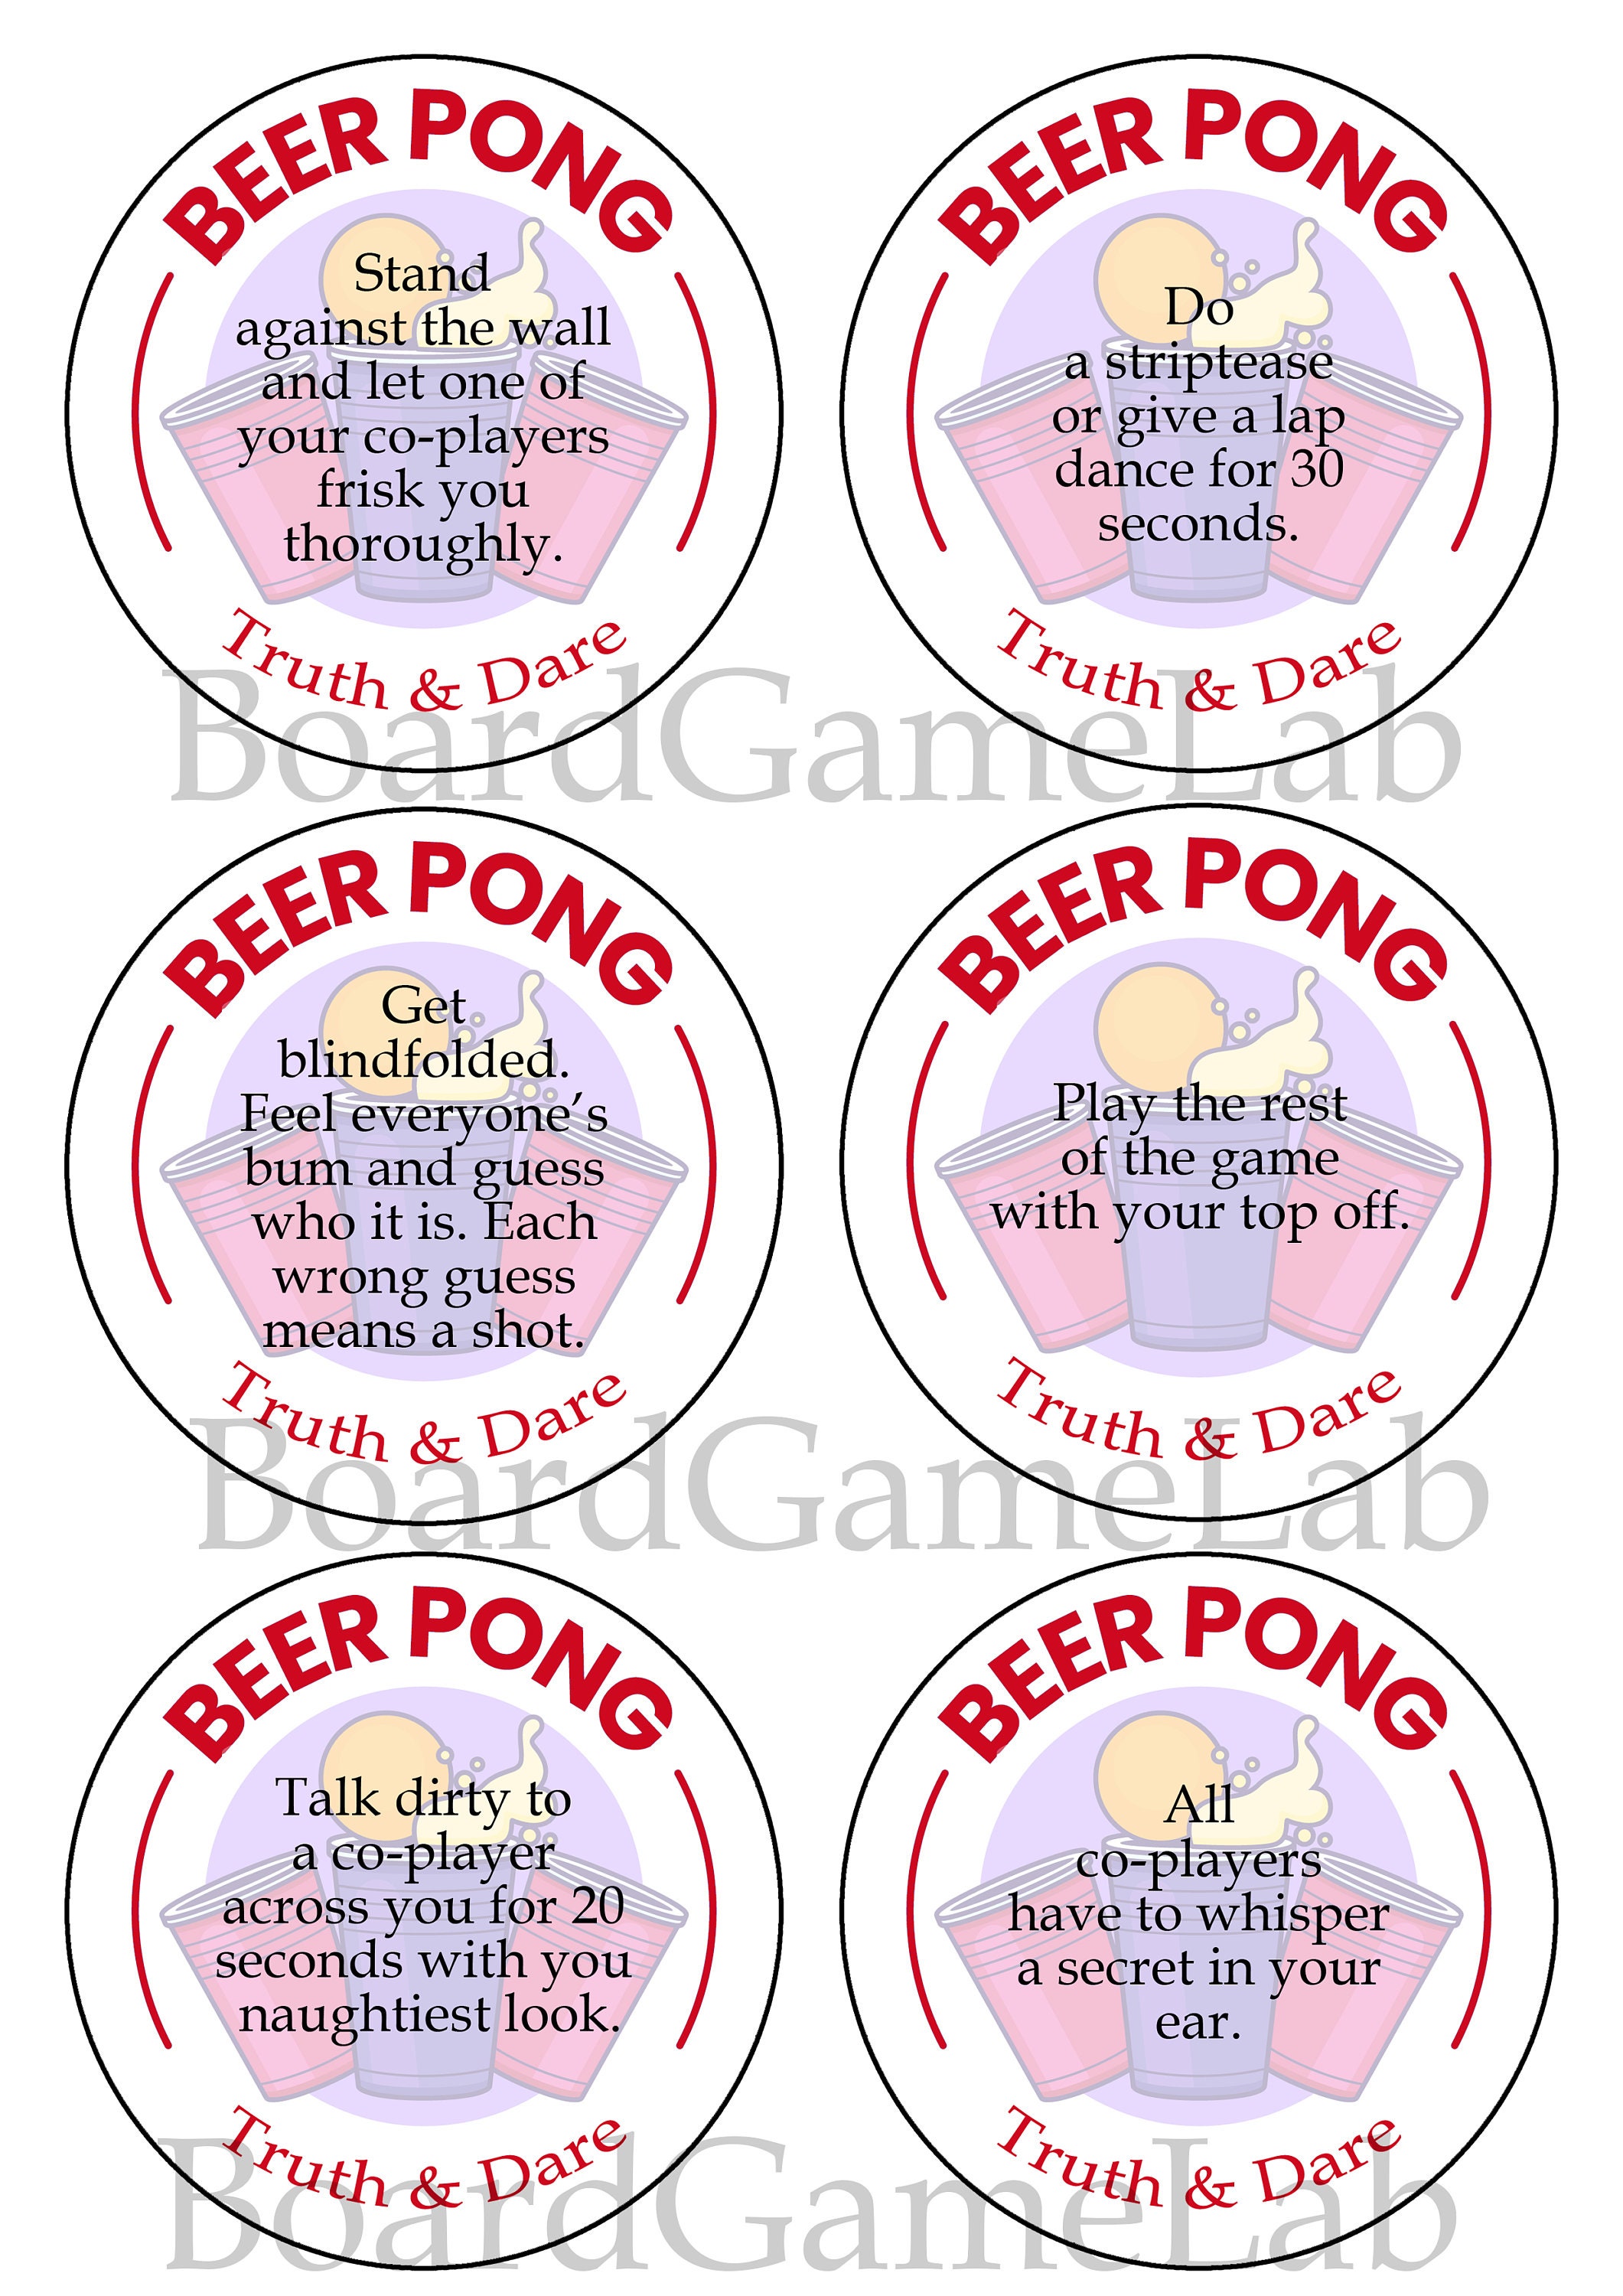 Party Beer Pong Game, TruthDare